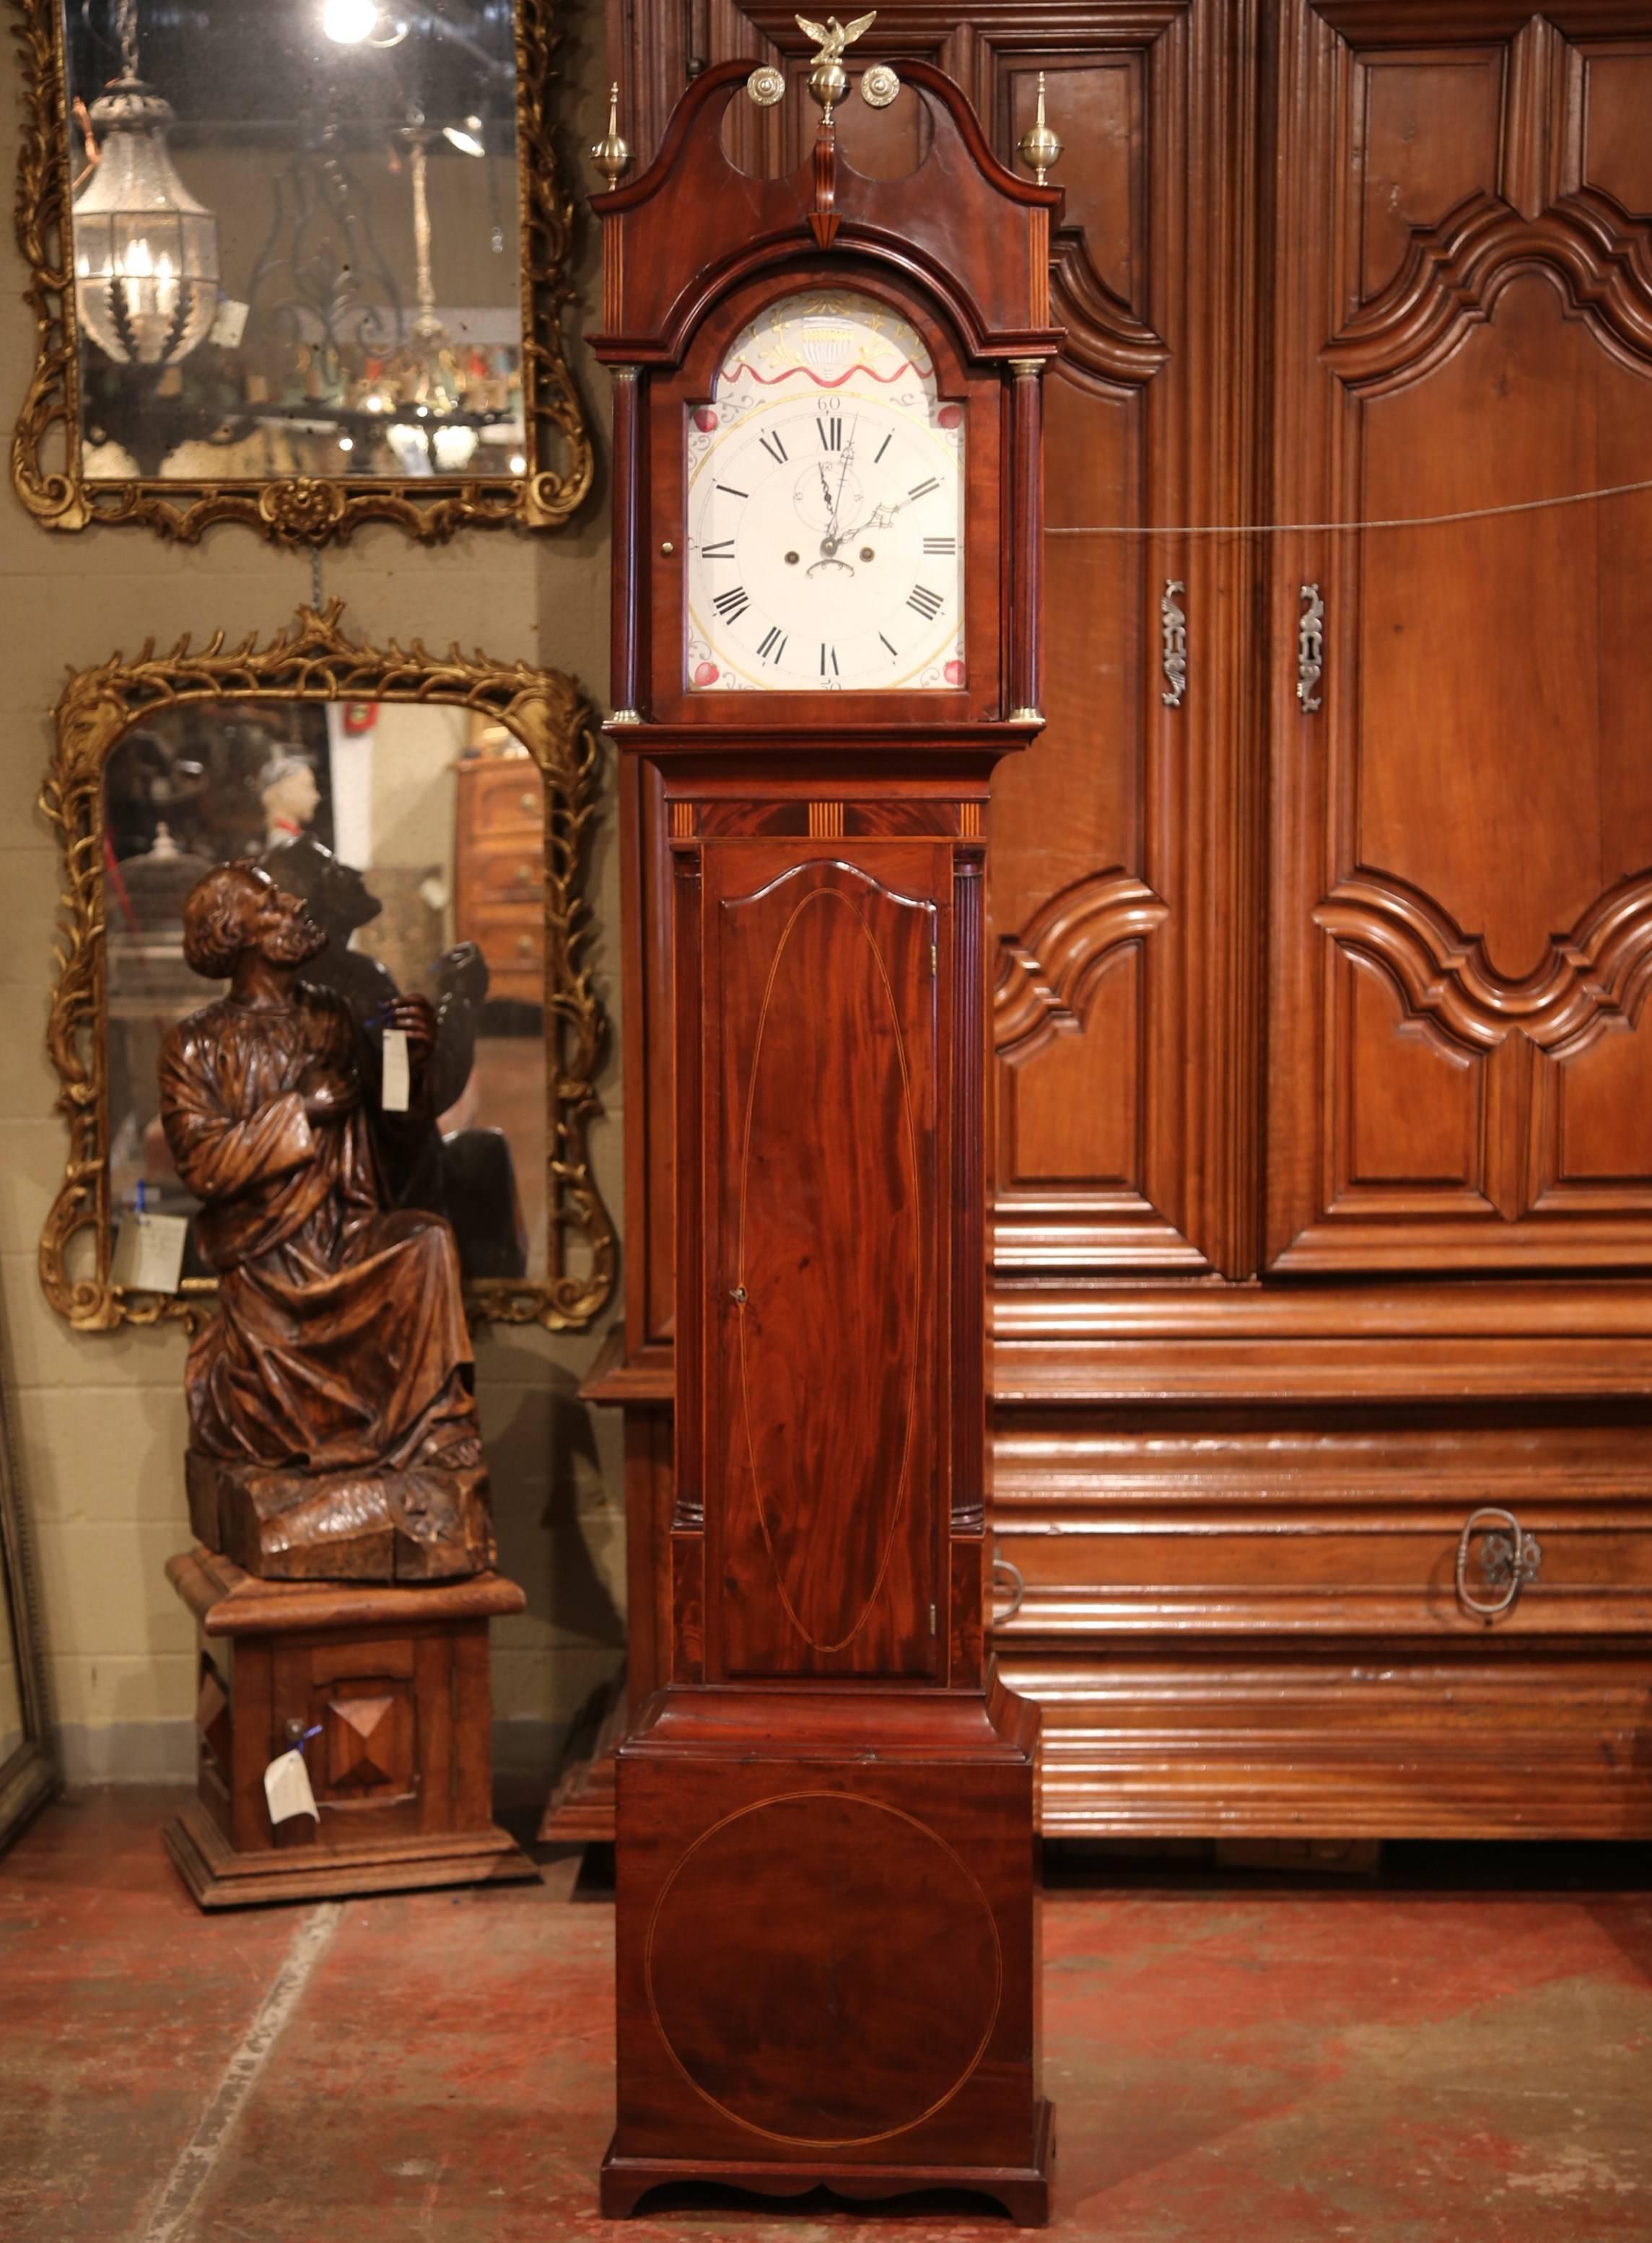 This elegant, antique Chippendale grandfather clock was carved in England, circa 1780. The tall case clock is in very good working order and features brass decorations on top, including a center eagle and spear finials on both sides. The clock